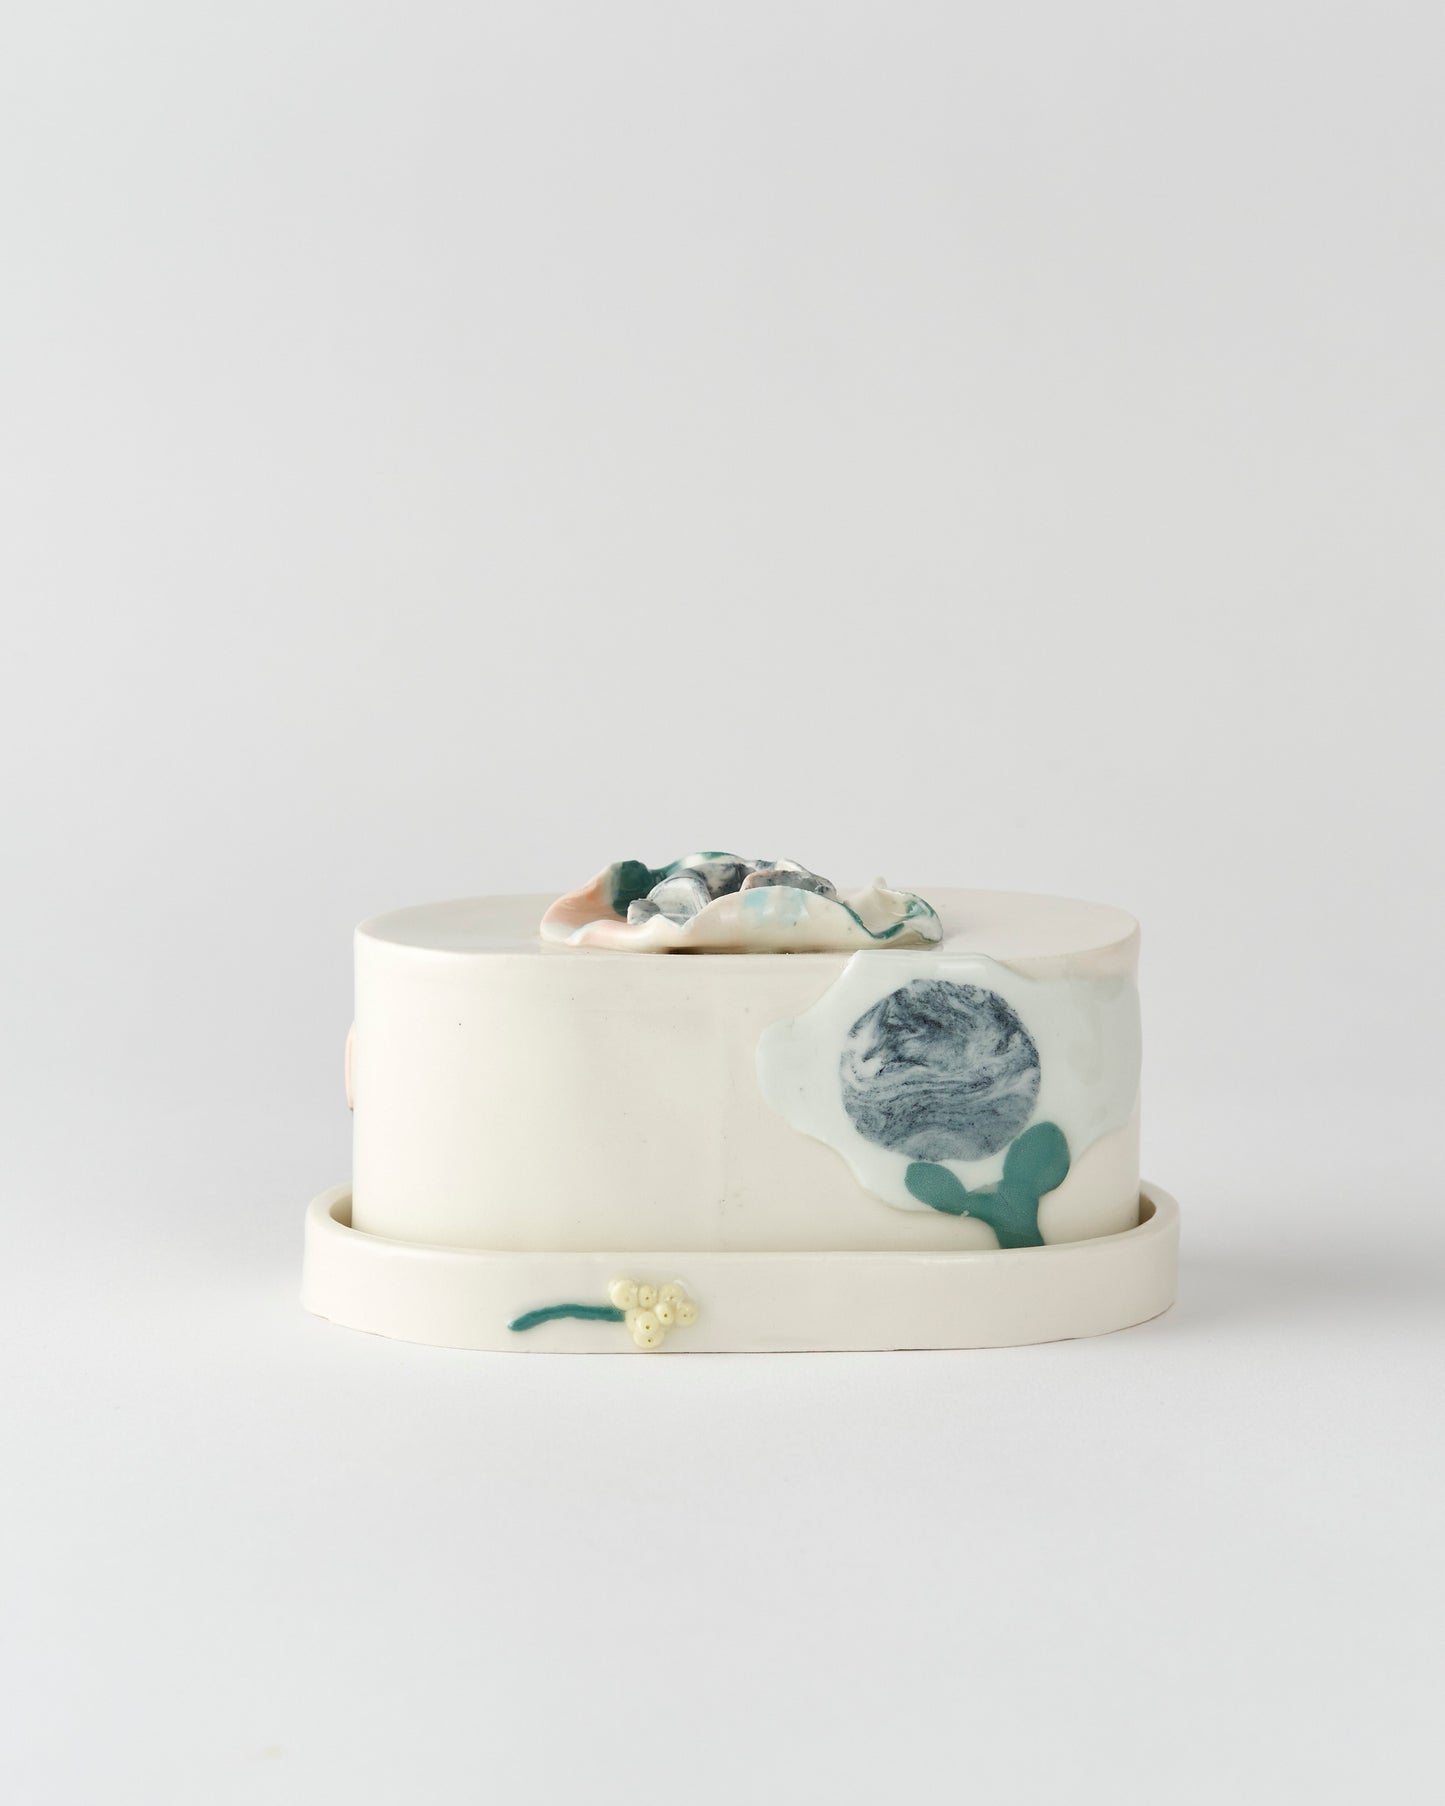 SALE Marie Priour / Forget me not / Butter Dish